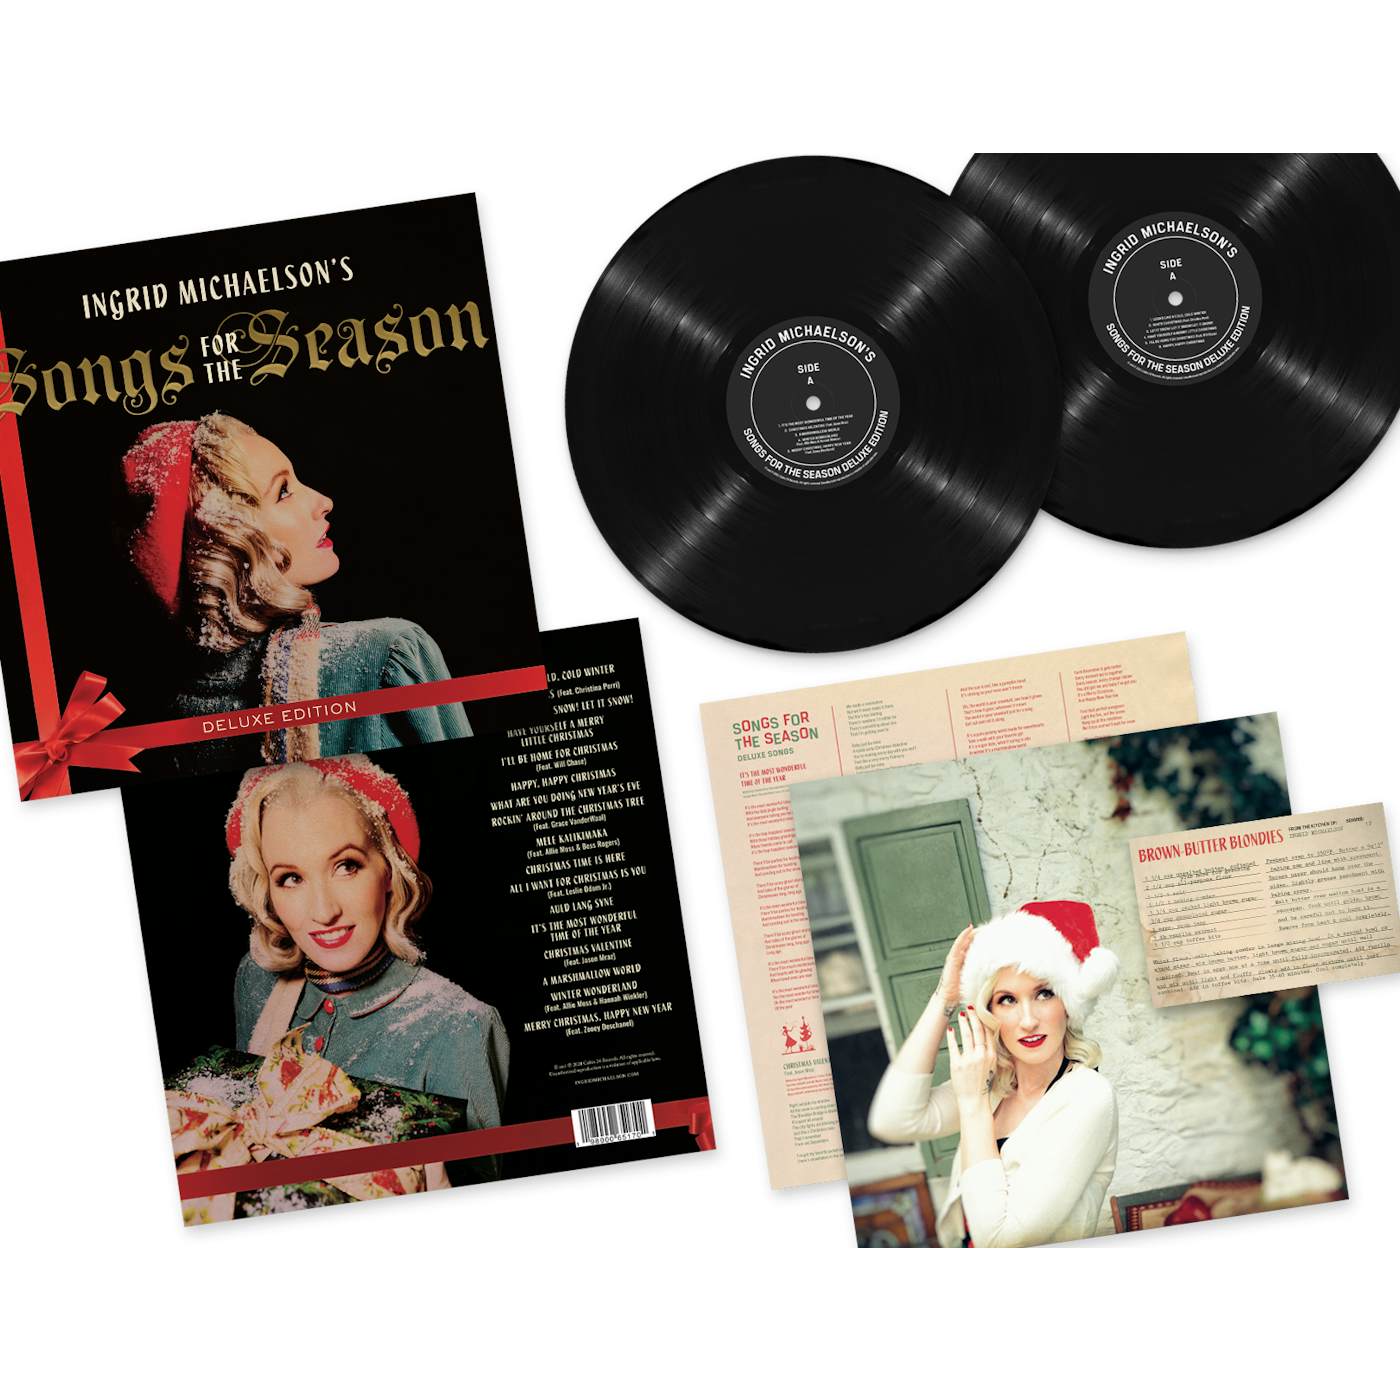 Ingrid Michaelson’s Songs For The Season Deluxe Edition